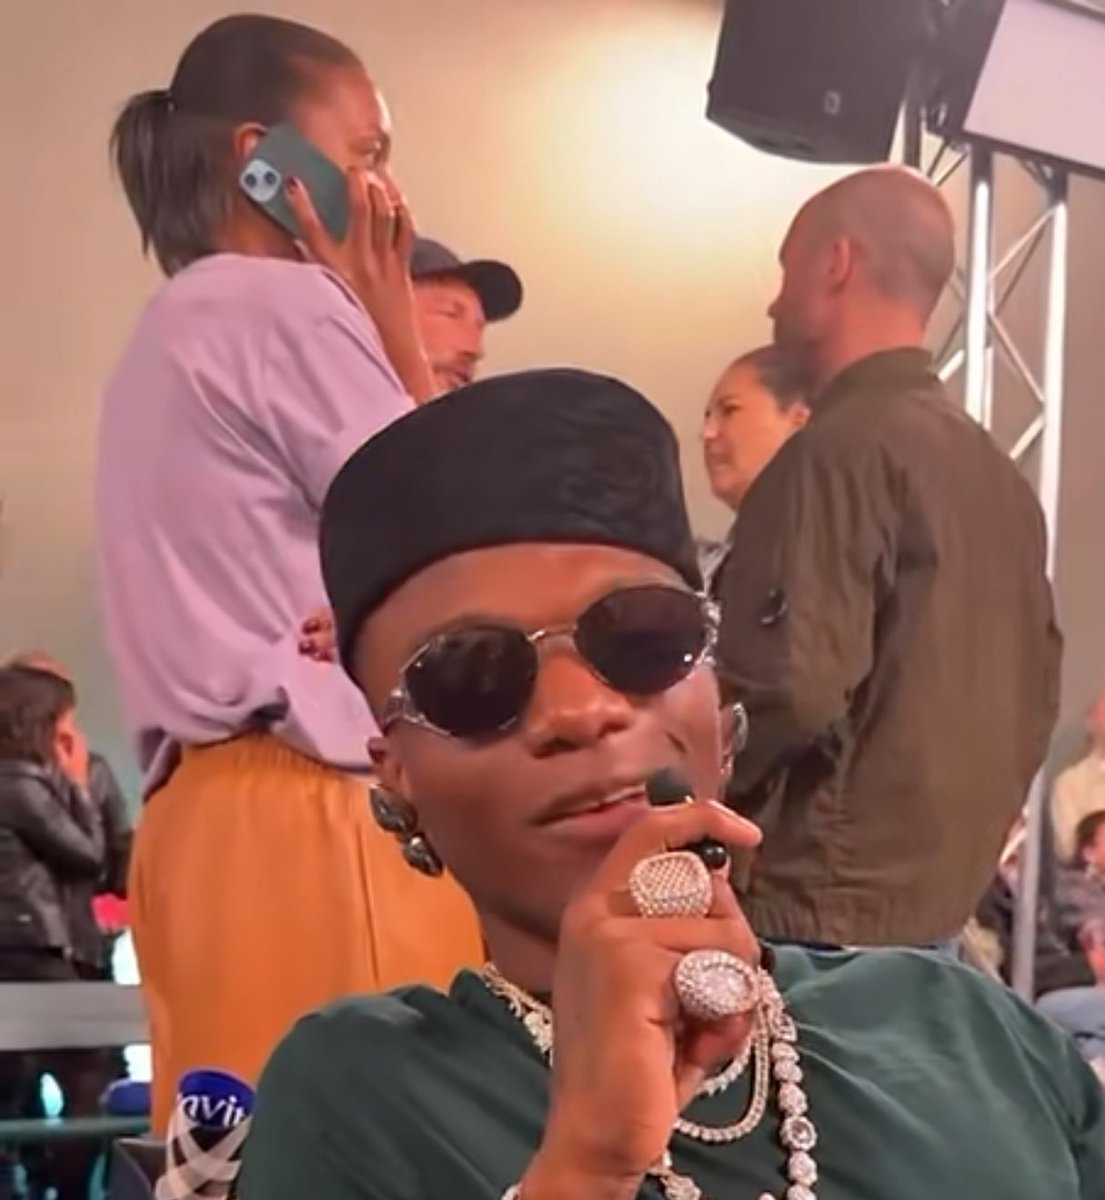 why wizkid dey wear butt plug for ein ear ? ninjas be taking this fashion thing too far these days, smh

who owns the toy sef ?